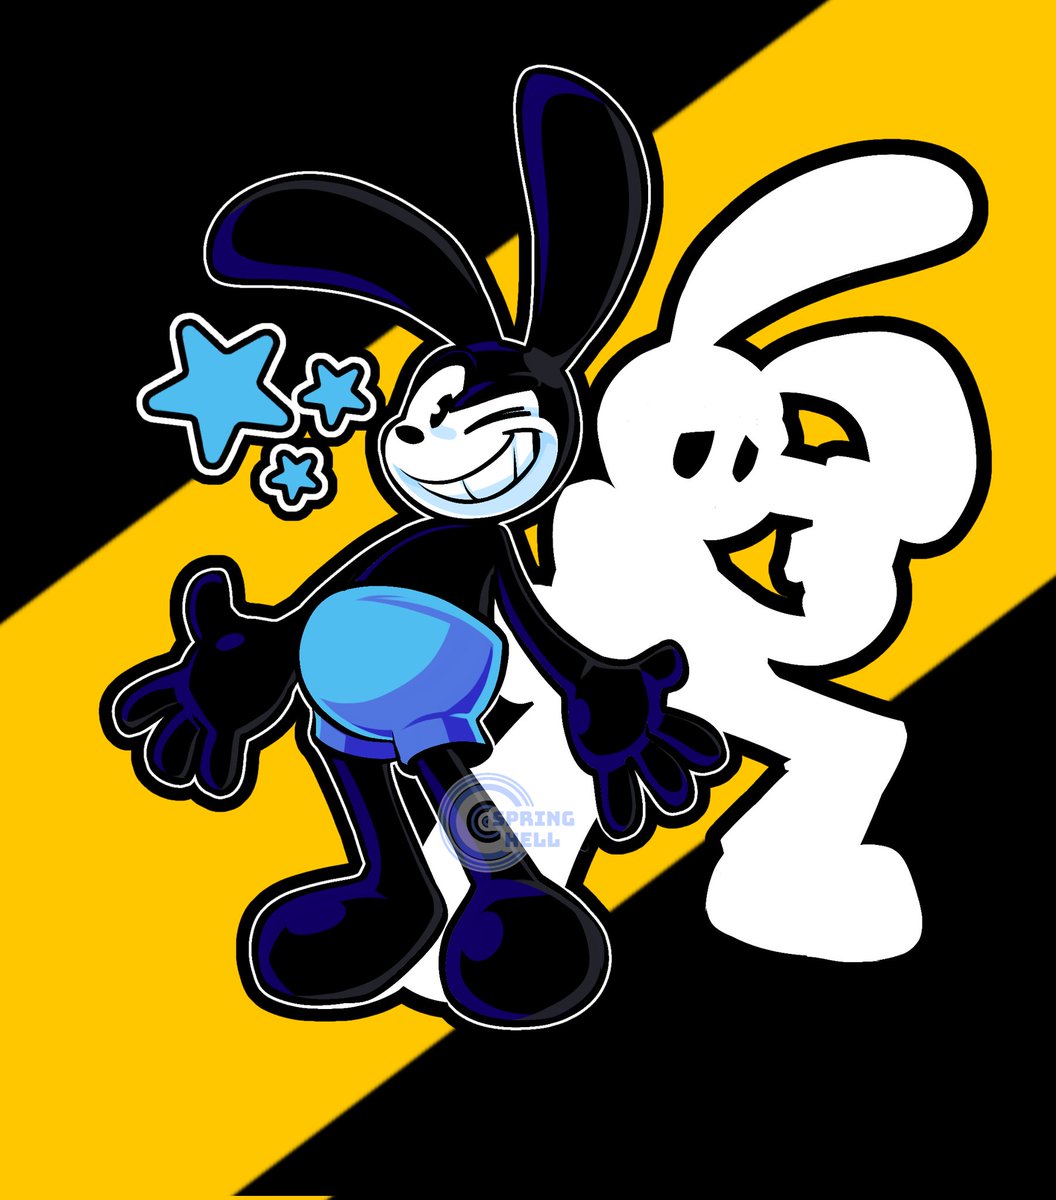 Lucky, isn't it?🐇

oswald the lucky rabbit from #Disney